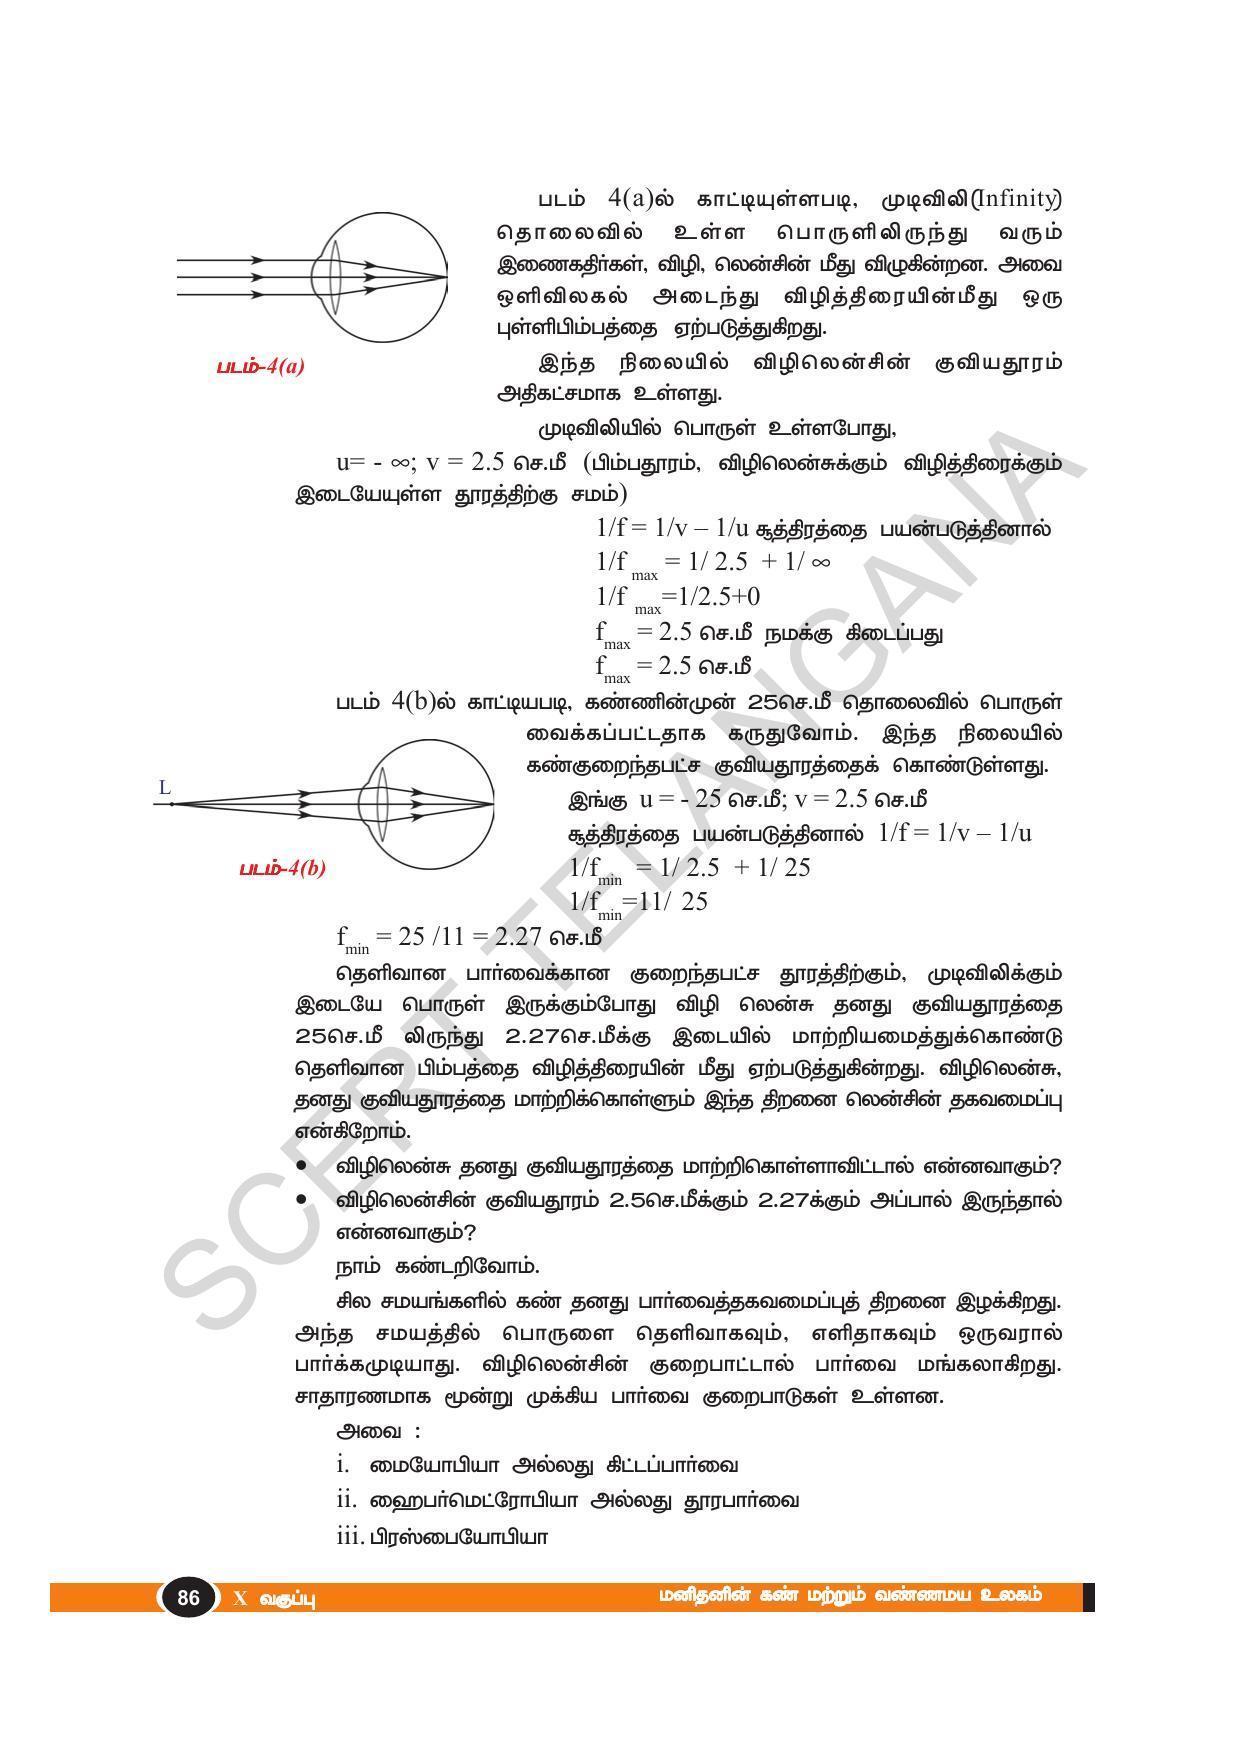 TS SCERT Class 10 Physical Science(Tamil Medium) Text Book - Page 98